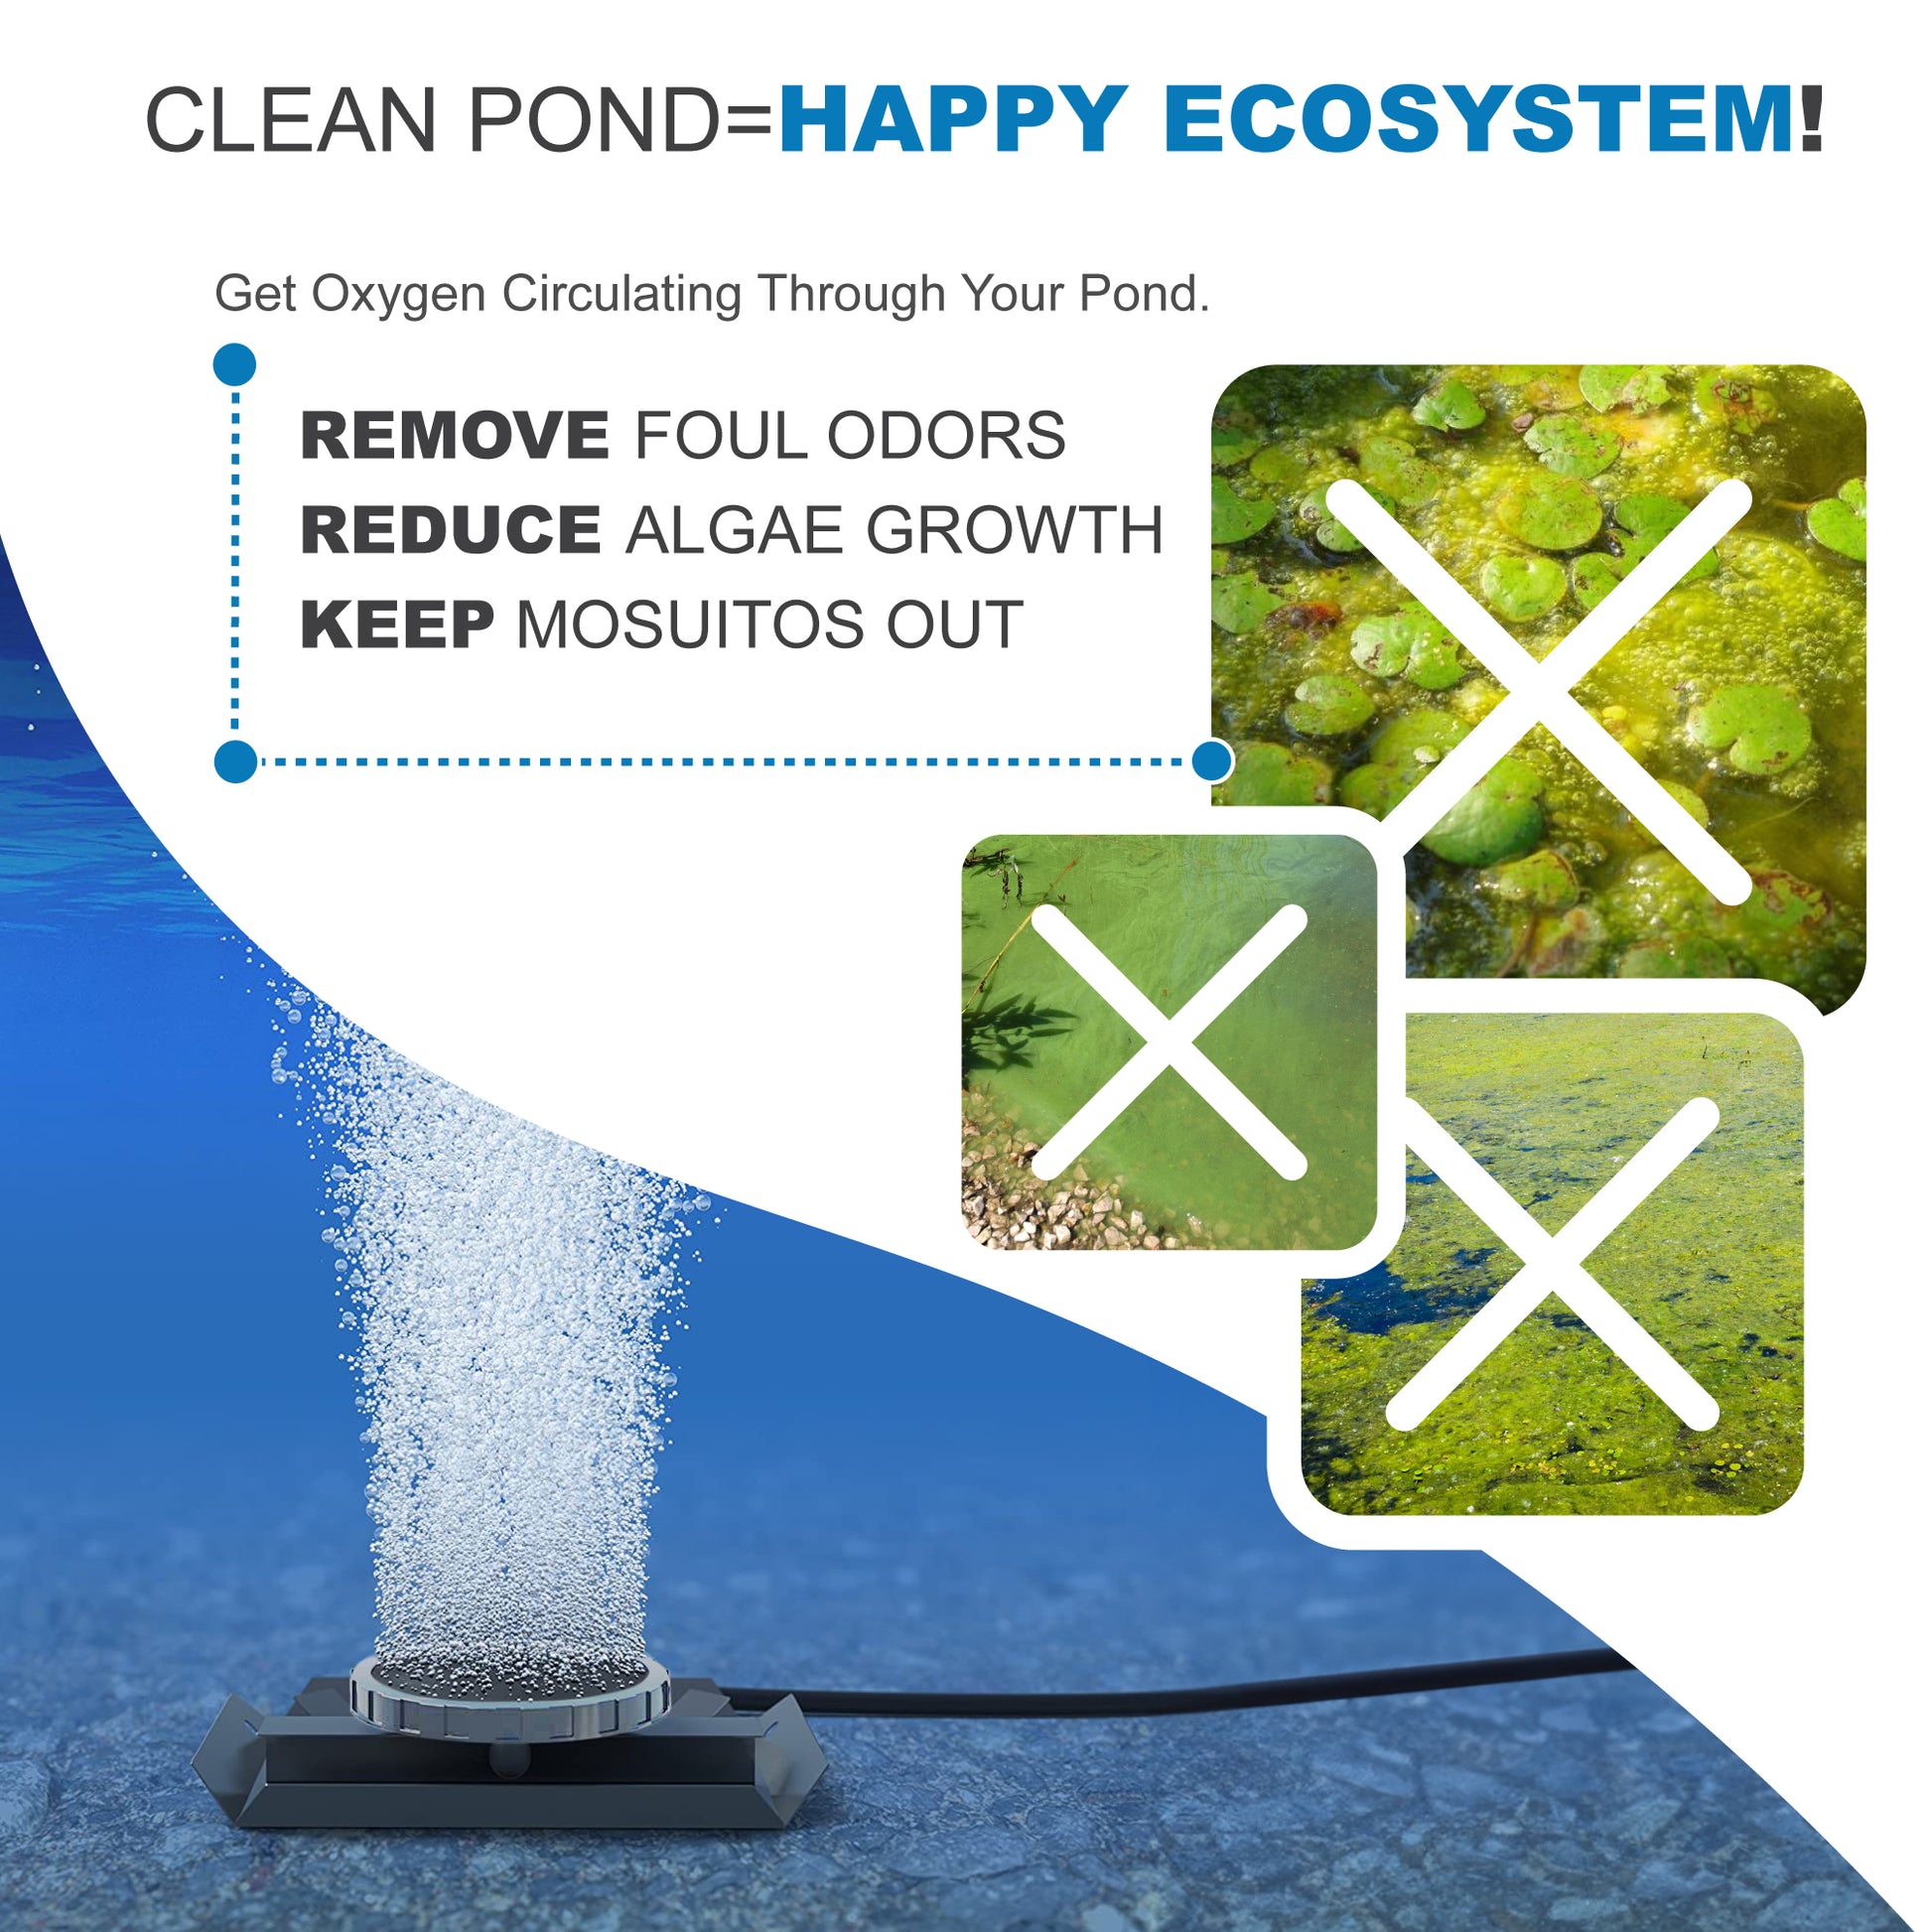 Solaer Solar Powered Pond Aerator - Up to 4 acres - Living Water Aeration